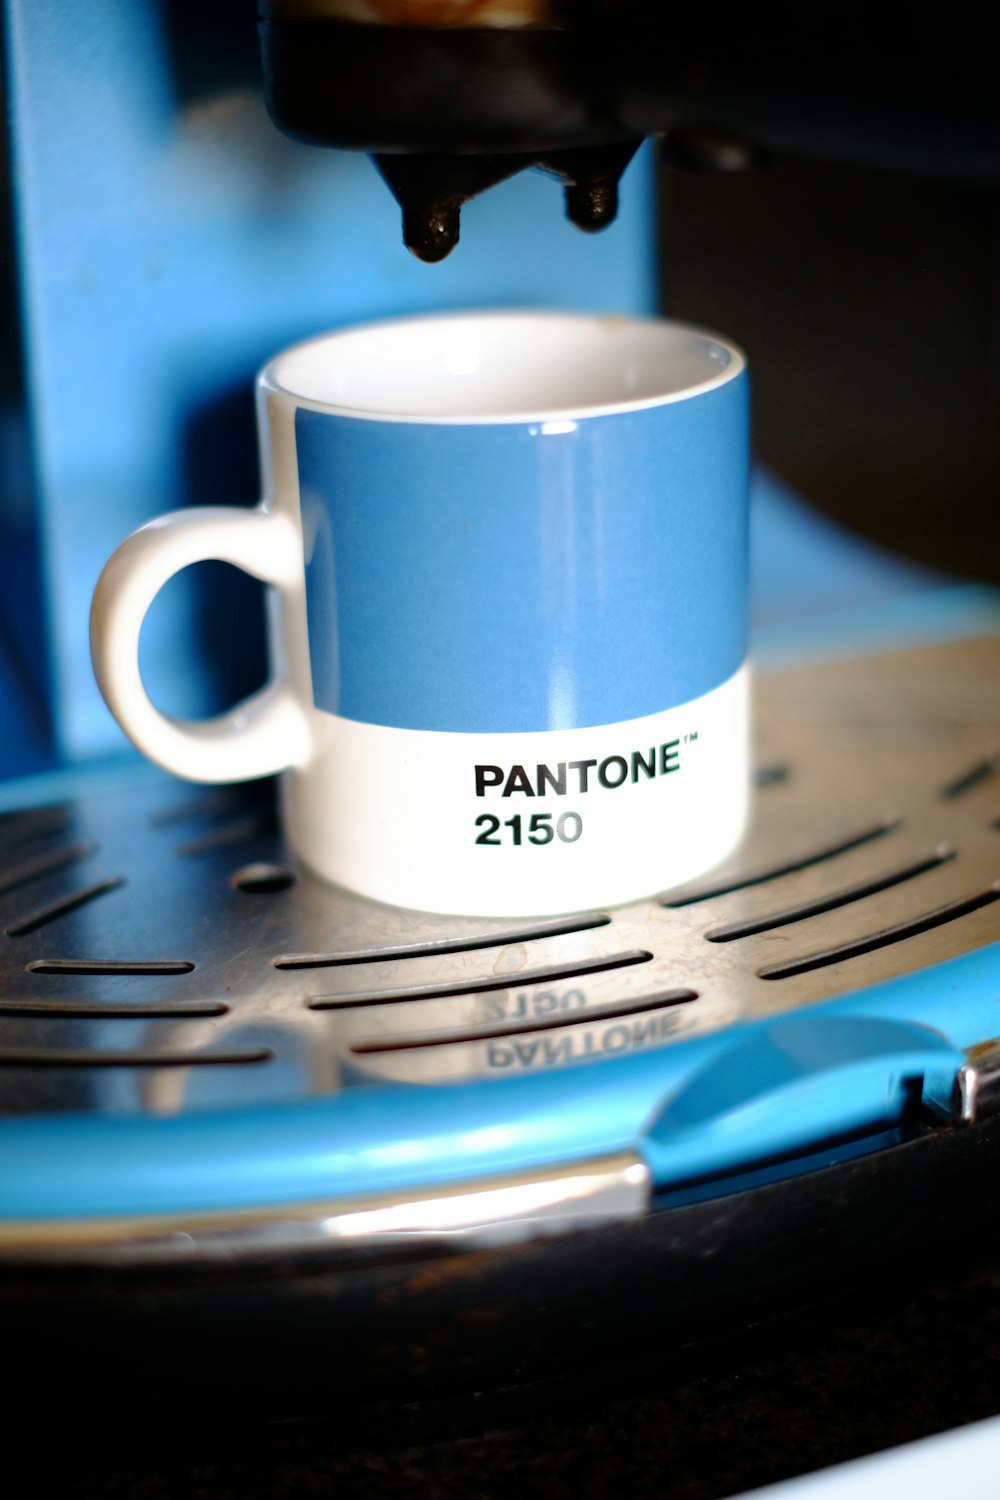 white and blue ceramic mug on silver steel table